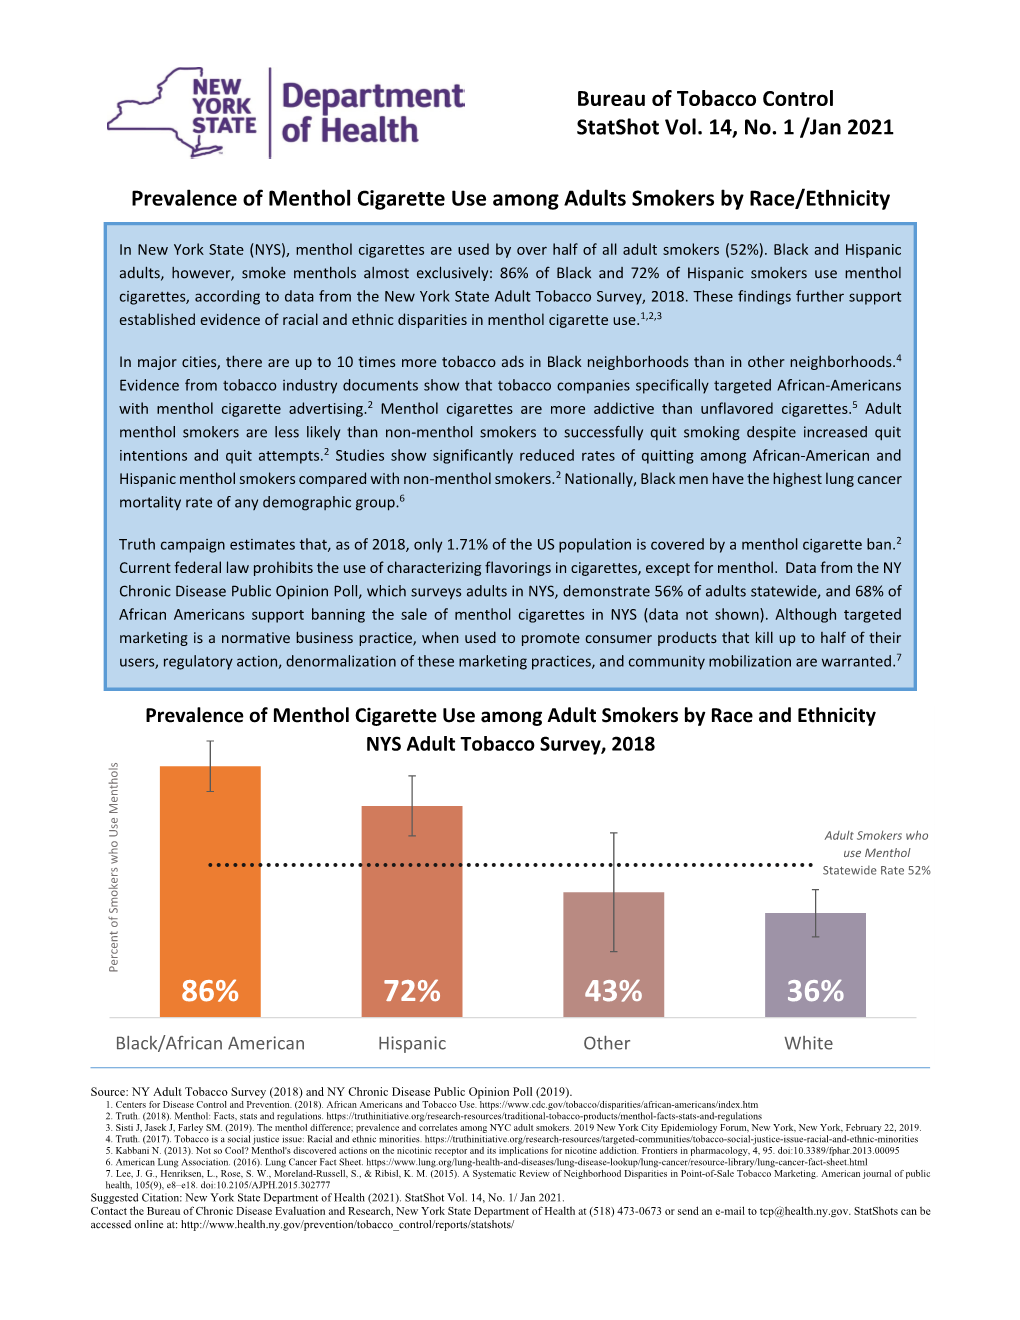 Prevalence of Menthol Cigarette Use Among Adult Smokers by Race and Ethnicity NYS Adult Tobacco Survey, 2018